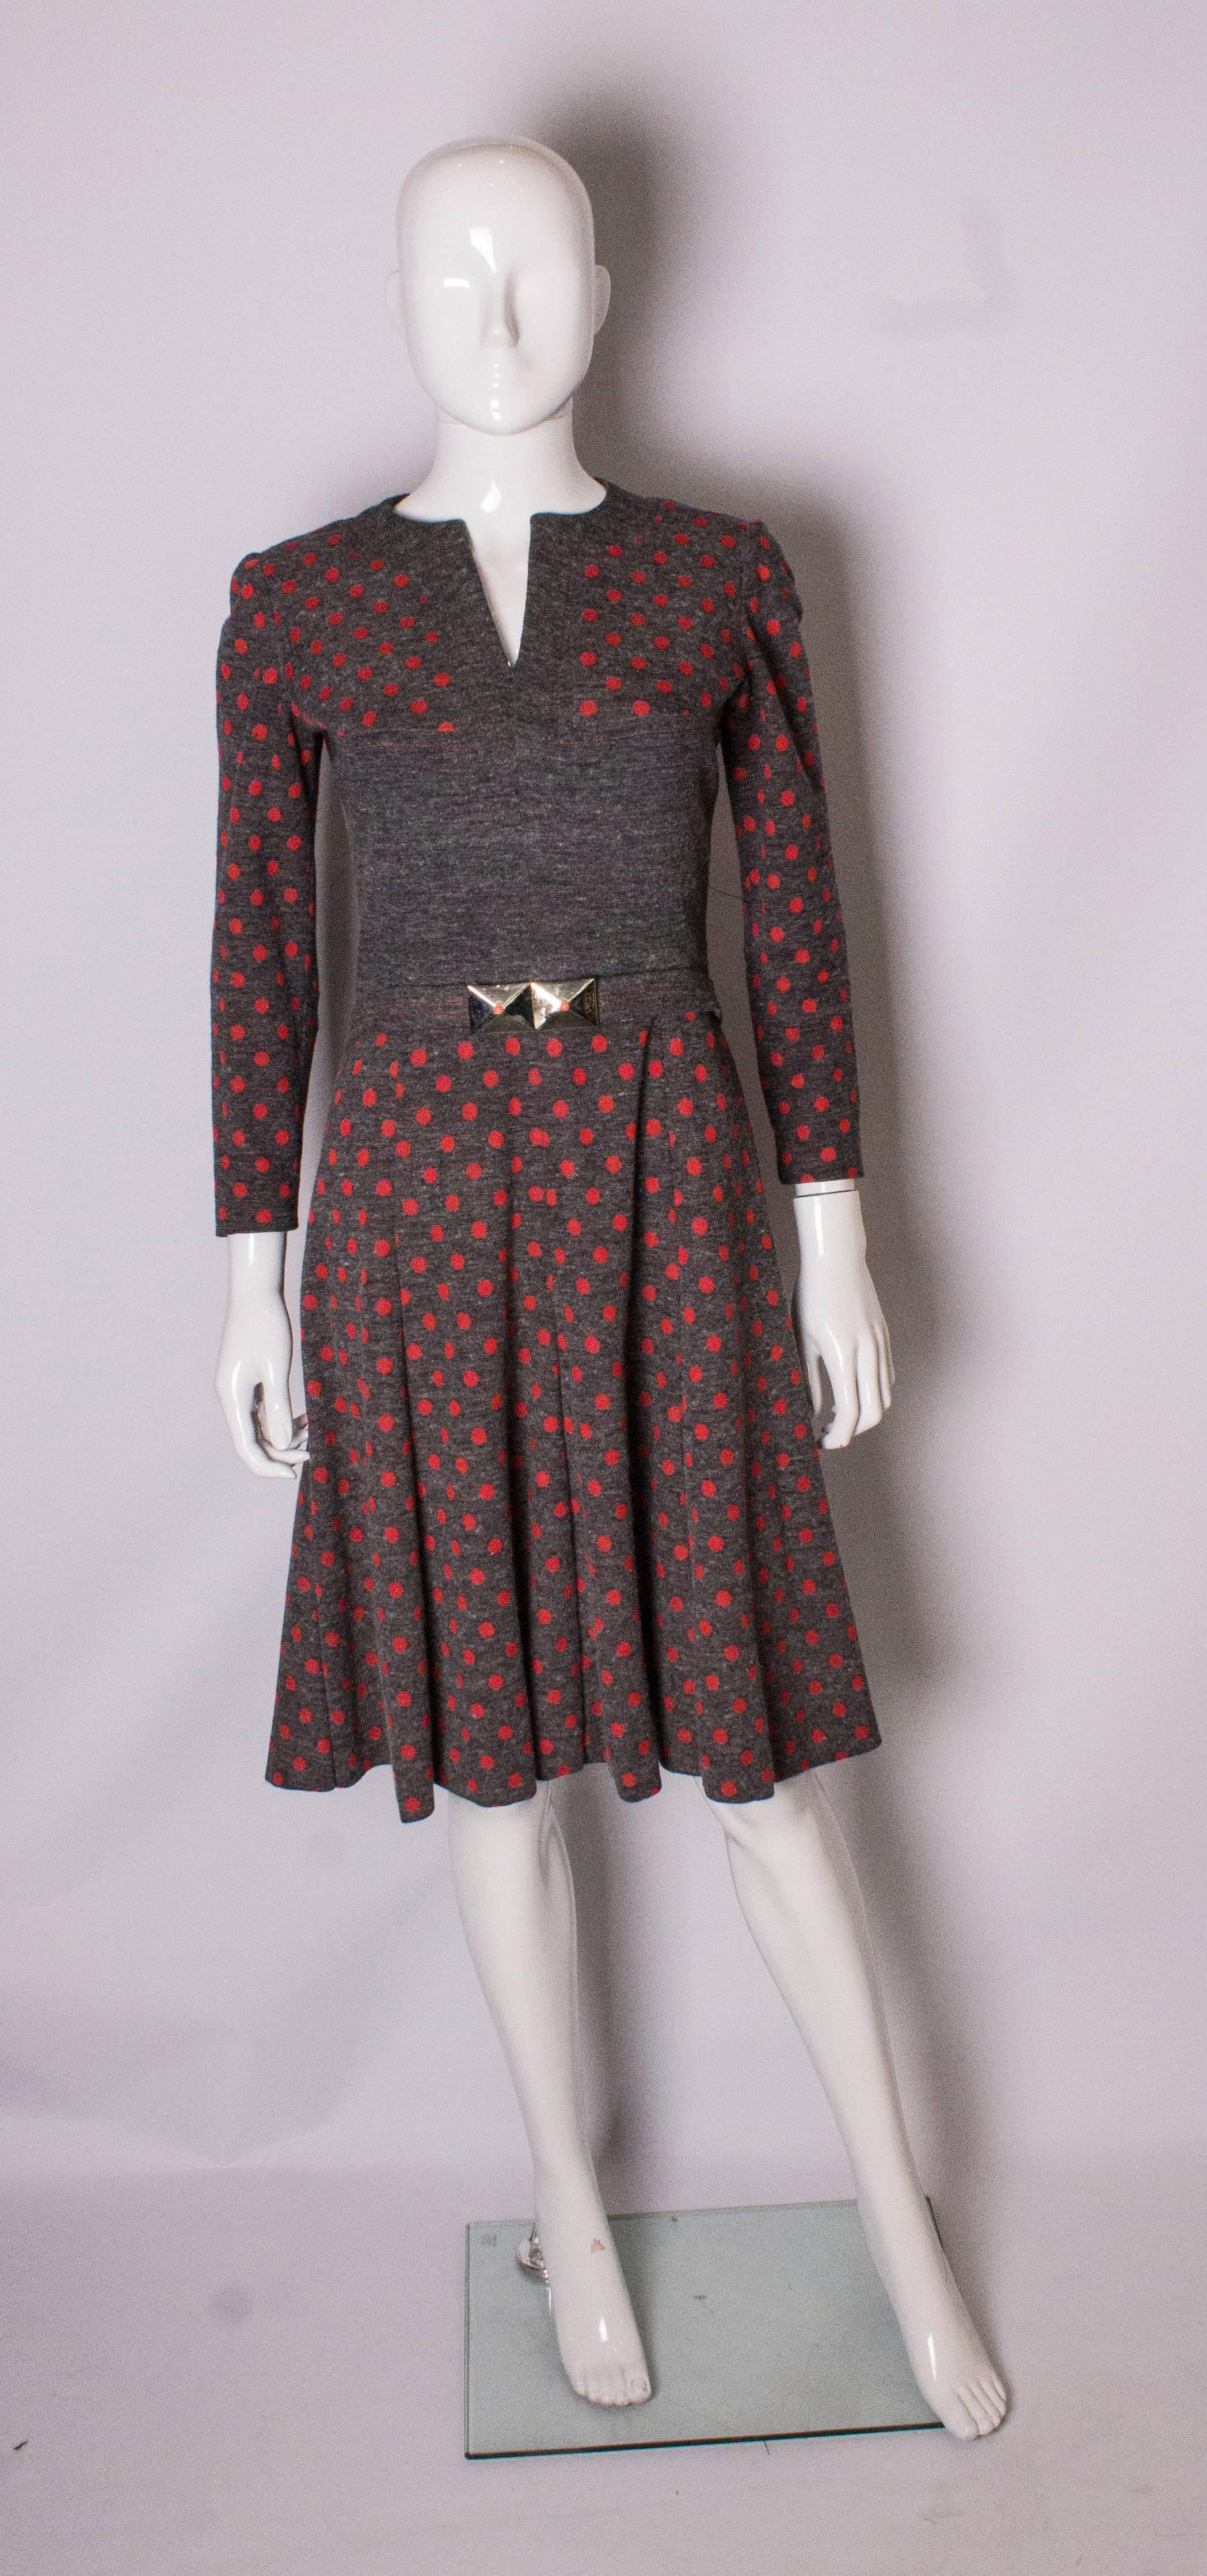 A chic and easy to wear dress by Hardy Amies. The dress has a v neckline, central back zip,plain fabric over the bust area and is fully lined. The skirt is flared and it has a self fabric belt with two buckles.